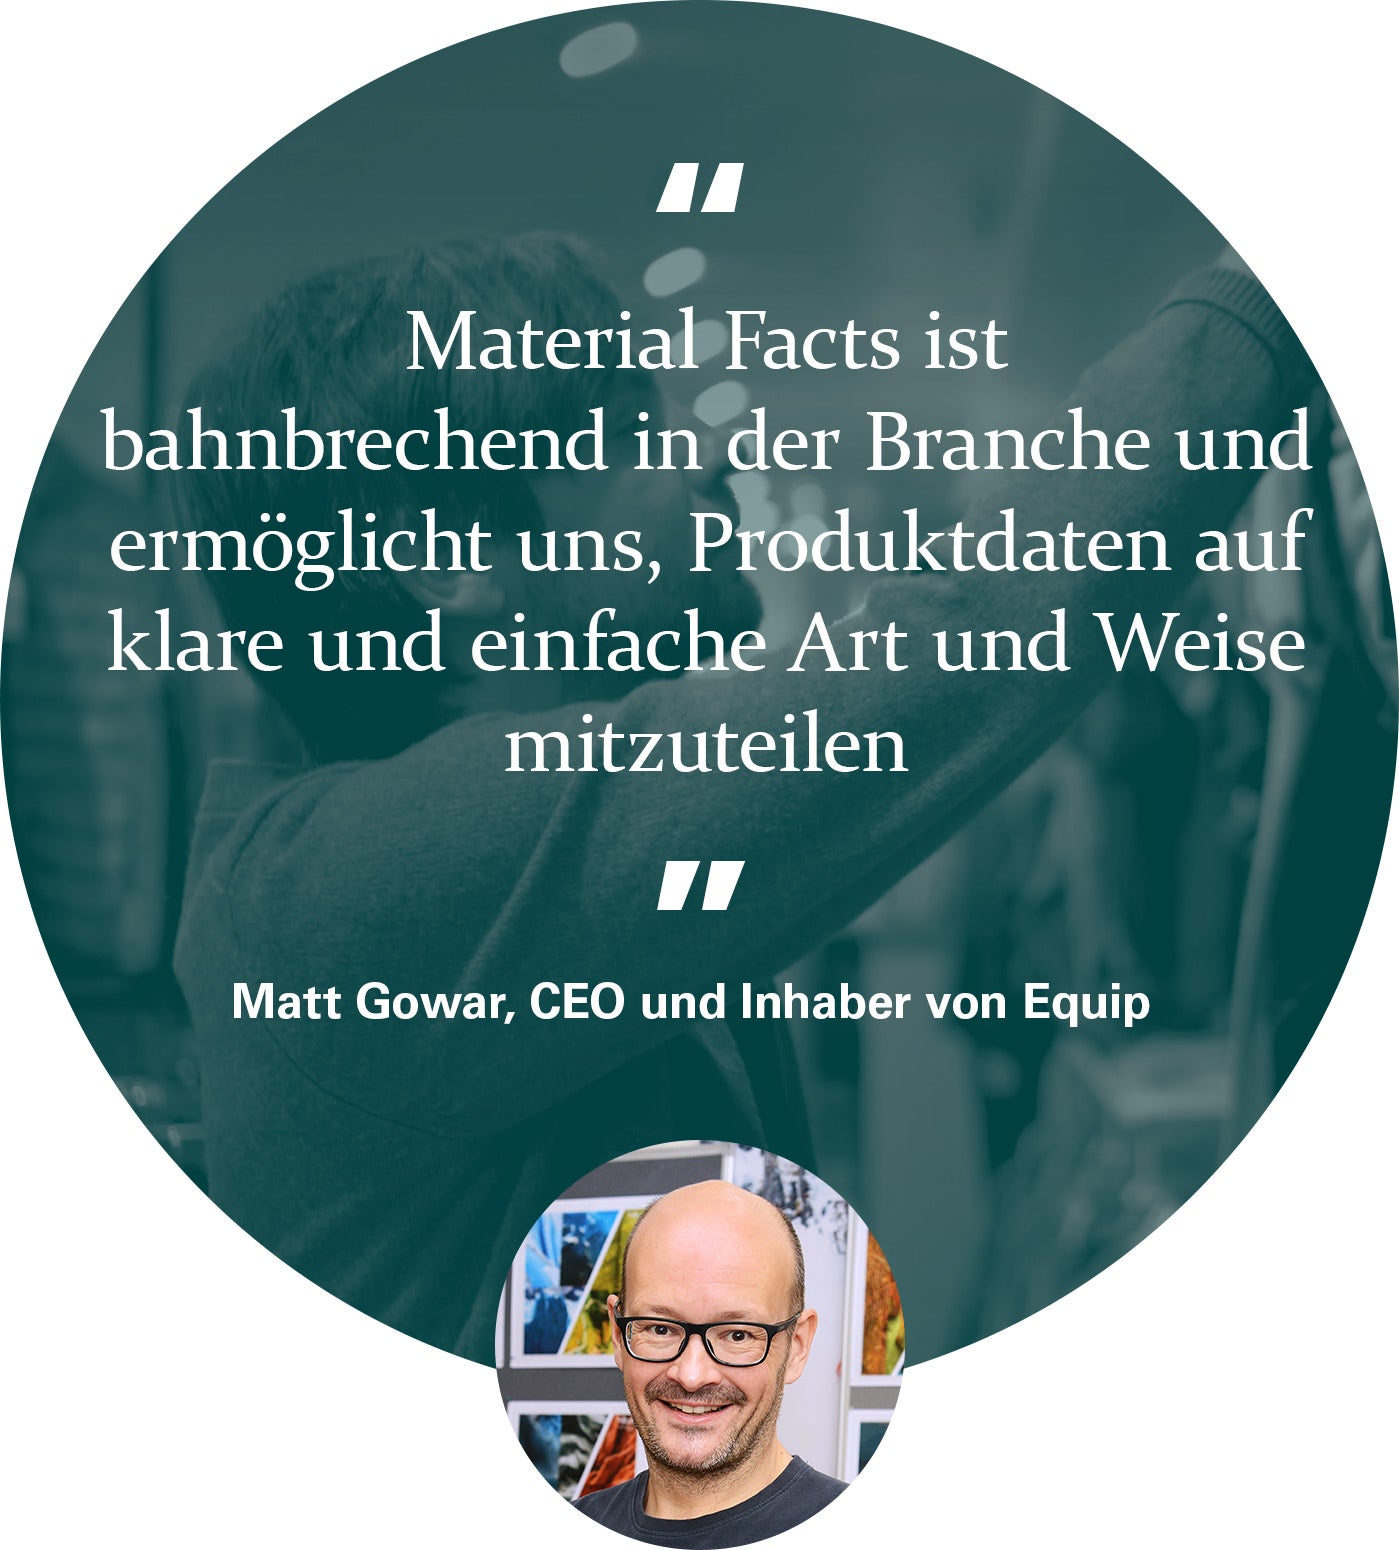 A circular image containing the following text "Material Facts is an  industry-first which allows us to share product data in a clear and simple way." - Matt Gowar, Equip CEO and Owner